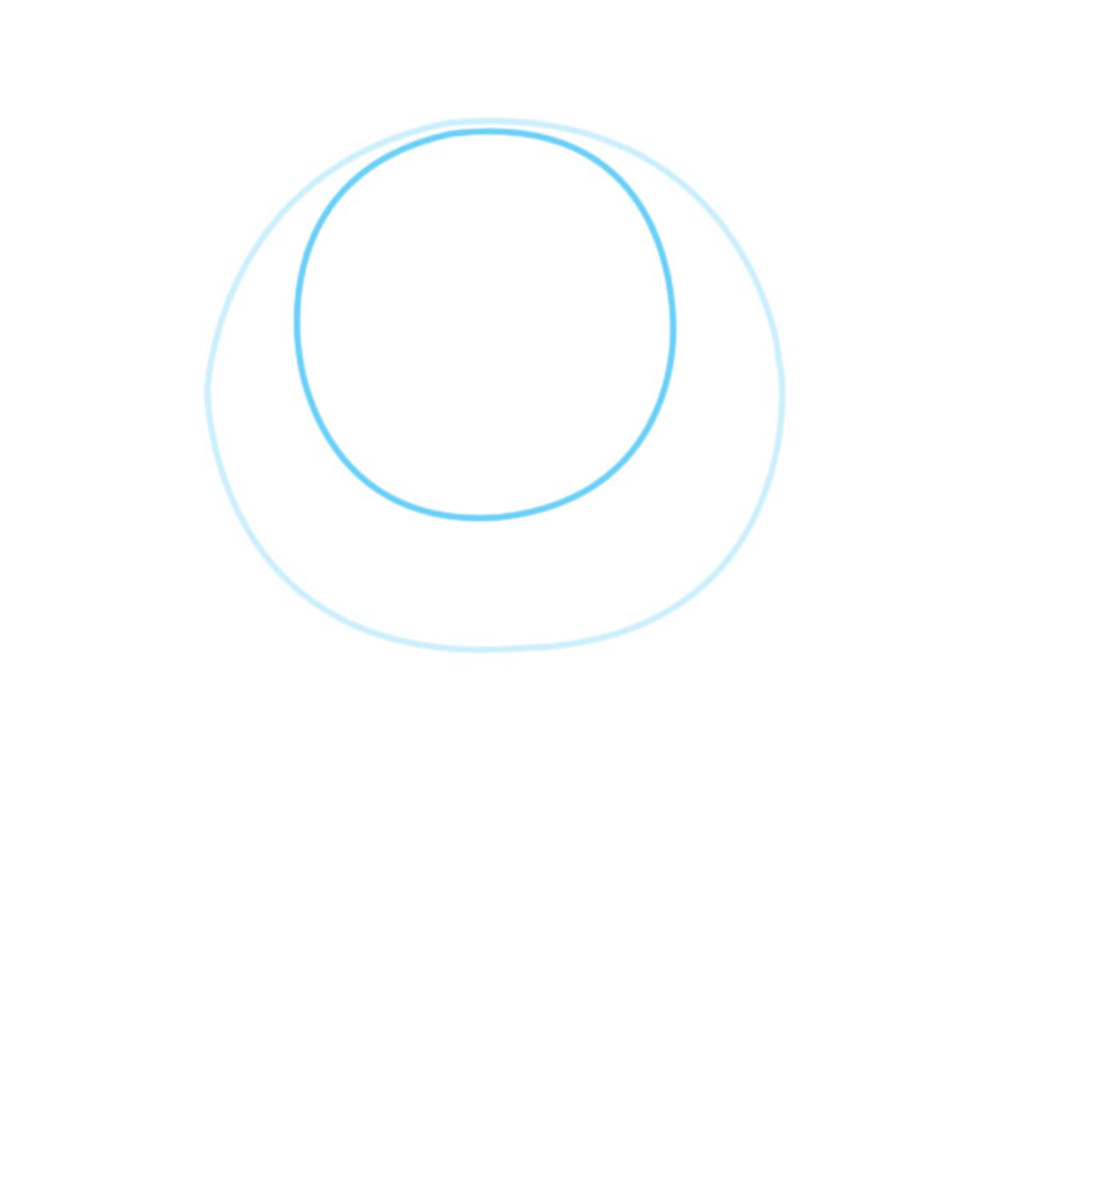 Step 2. Draw a smaller circle within the larger circle (his eye).